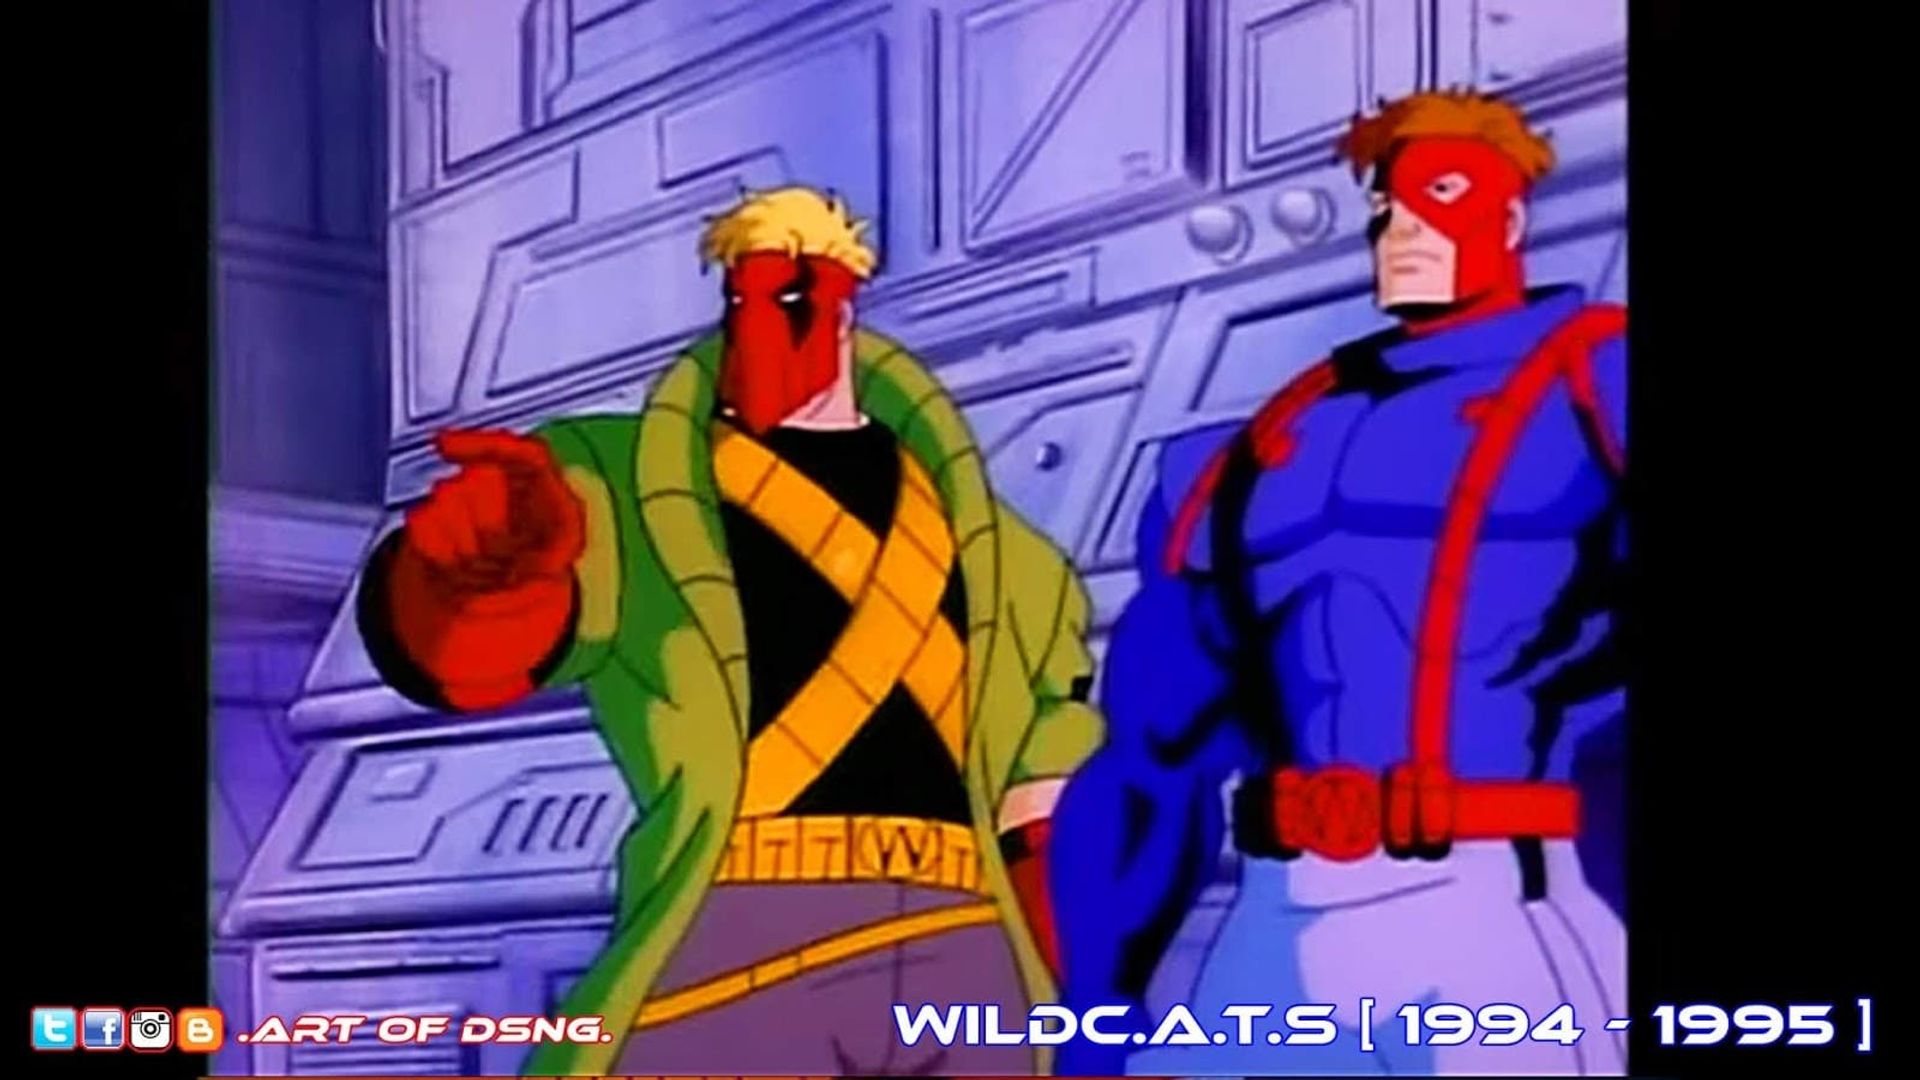 WildC.A.T.S Backdrop